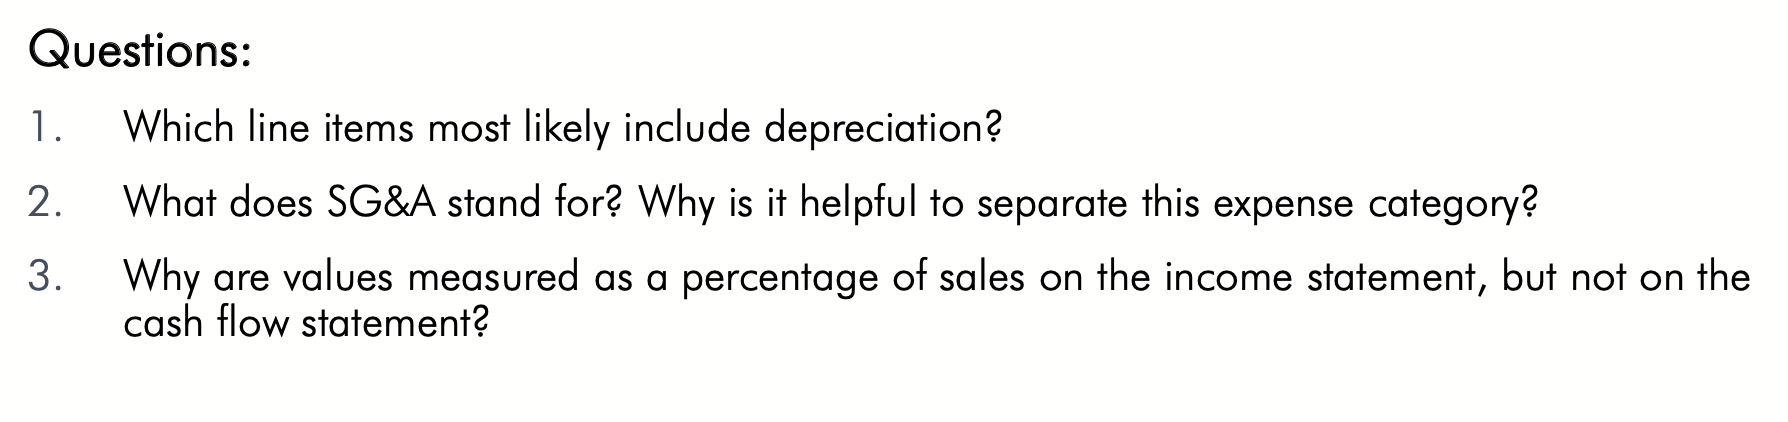 Questions:1. Which line items most likely include depreciation?2. What does SG&A stand for? Why is it helpful to separate t